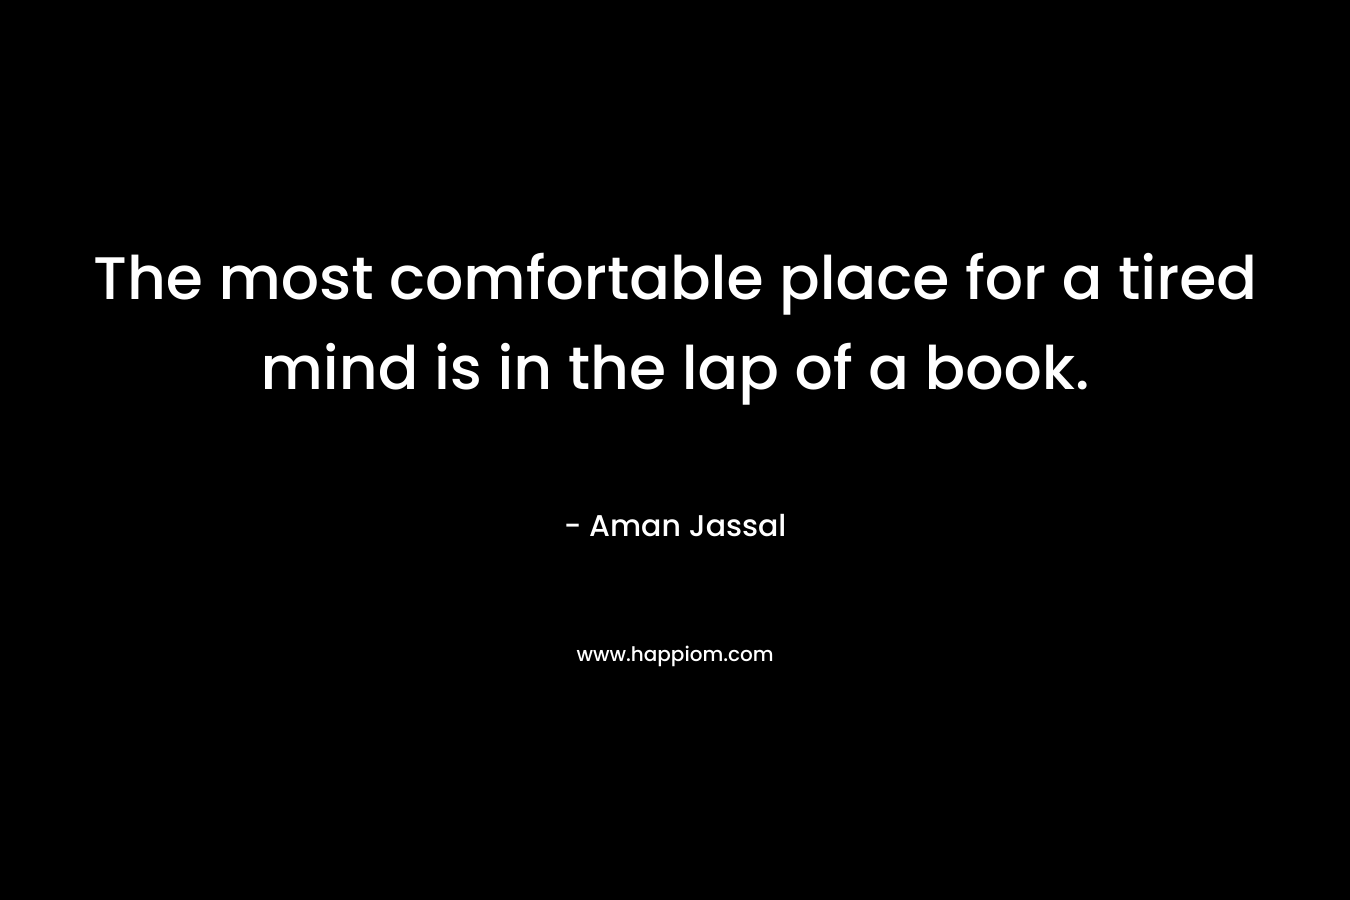 The most comfortable place for a tired mind is in the lap of a book. – Aman Jassal